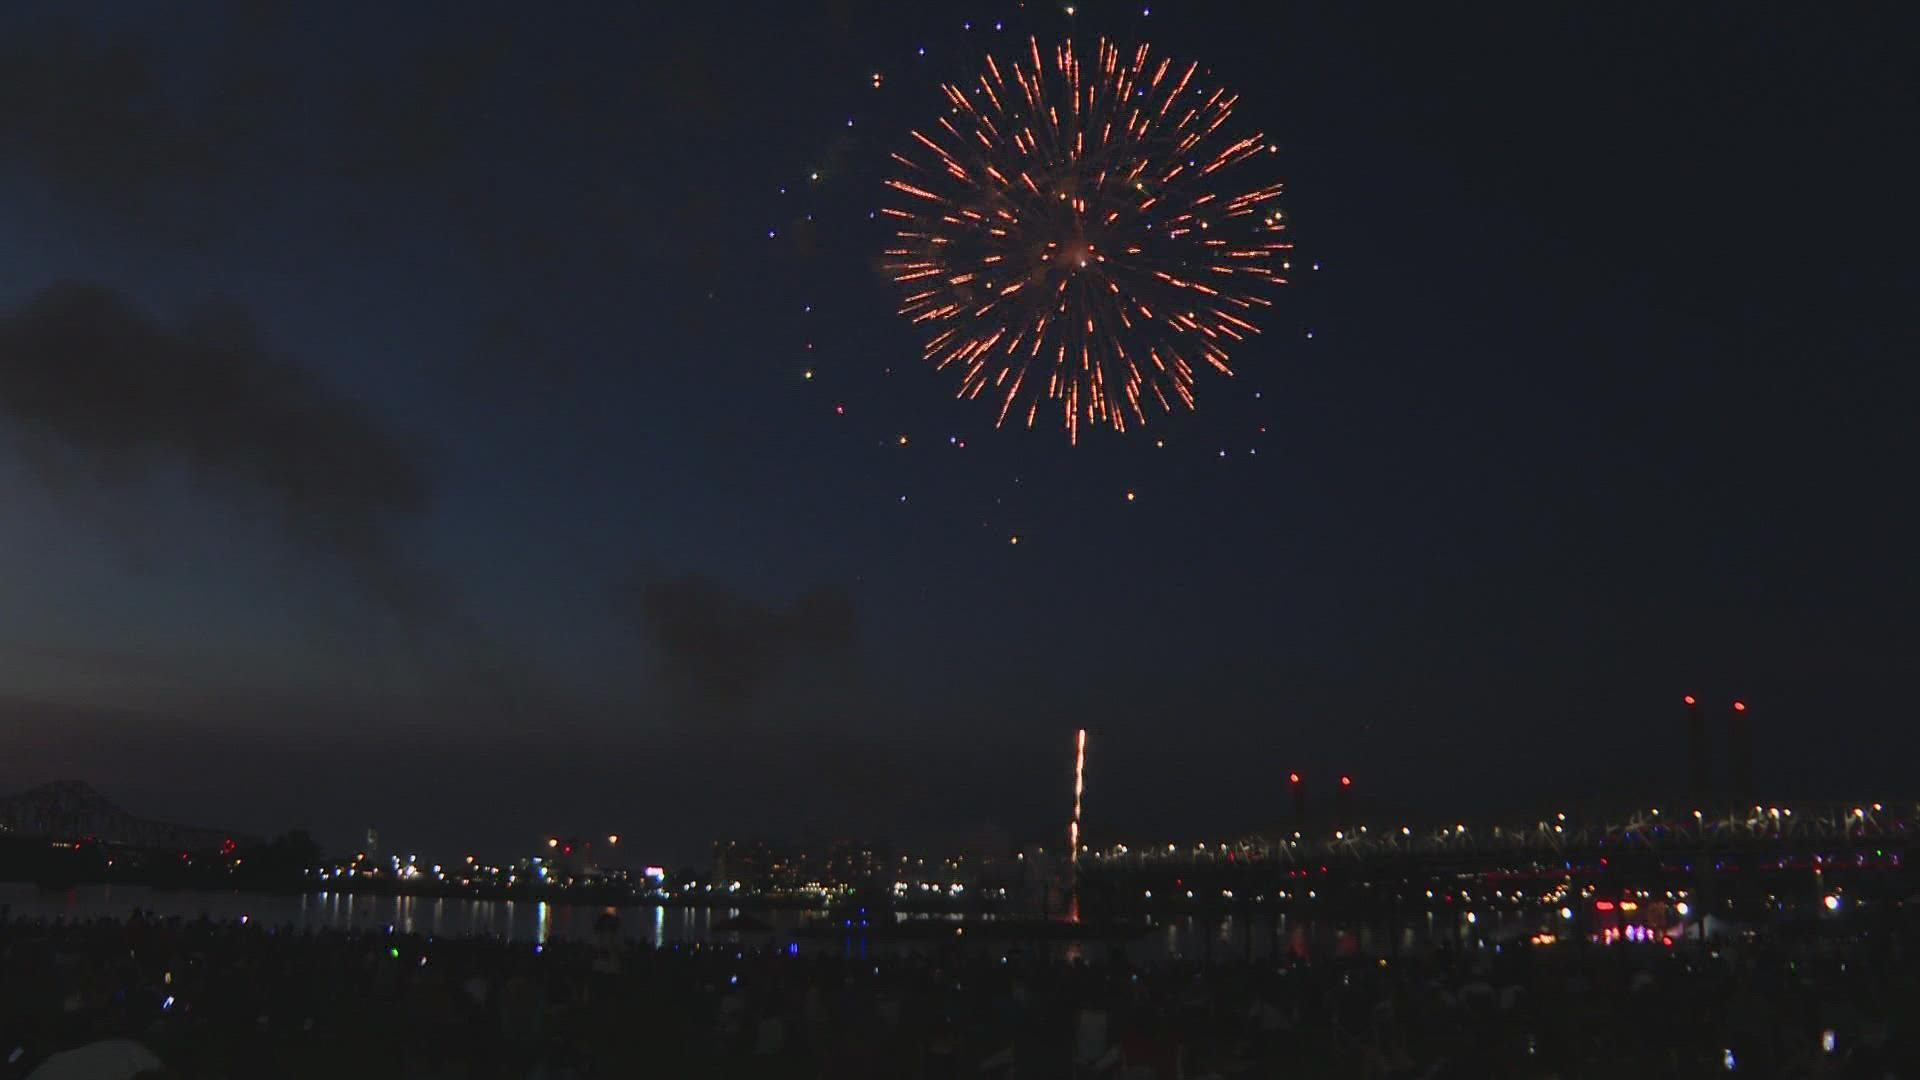 Many in Louisville attended the fireworks display at the Waterfront but had safety at the forefront of their minds following the mass shooting in Illinois.